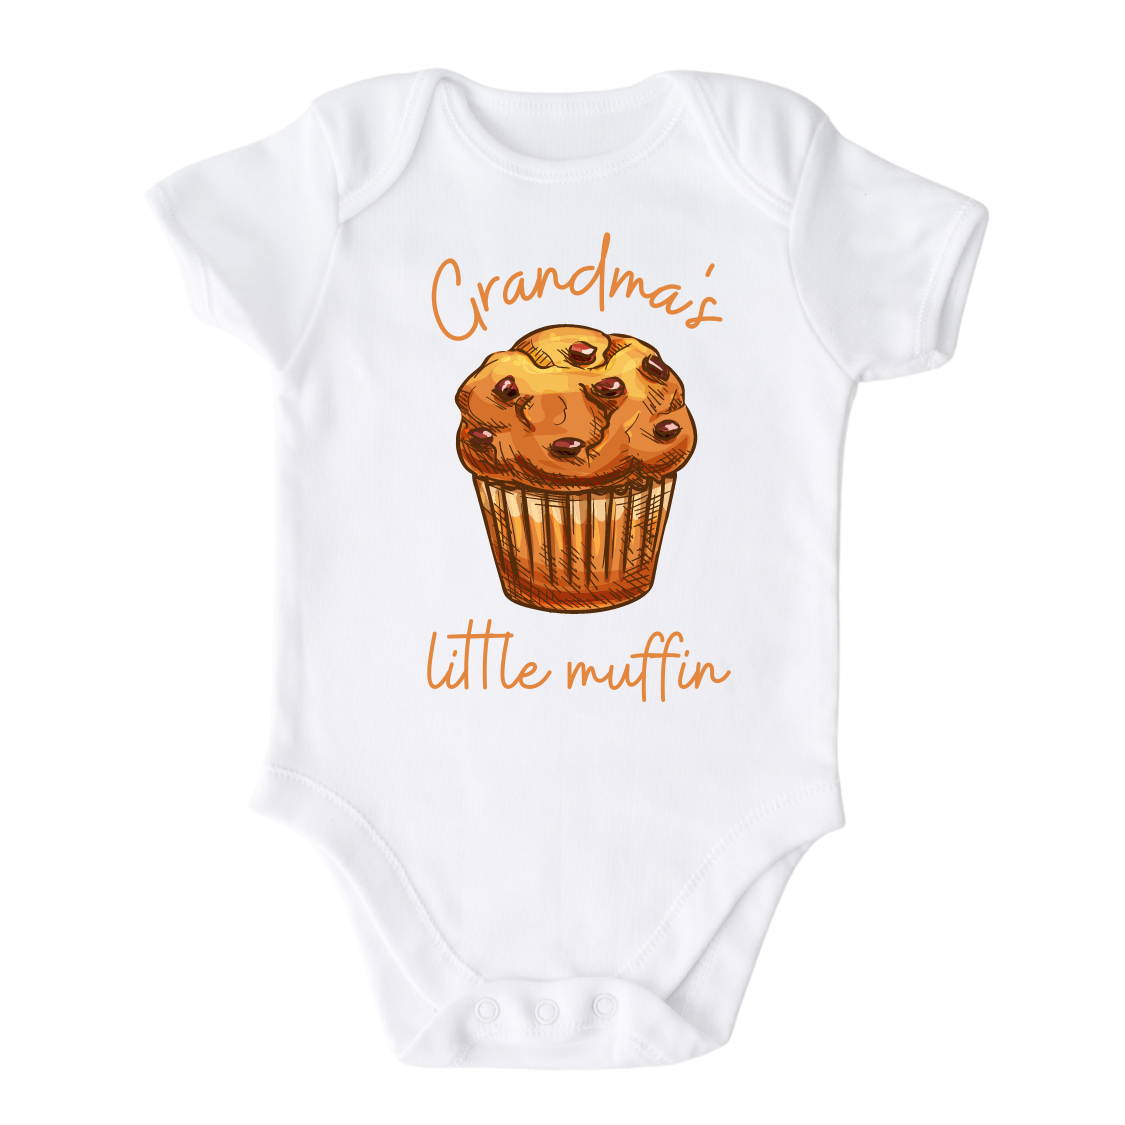 Baby Onsie with a cute printed design of a muffin and customizable text that says, 'Grandma's Little Muffin